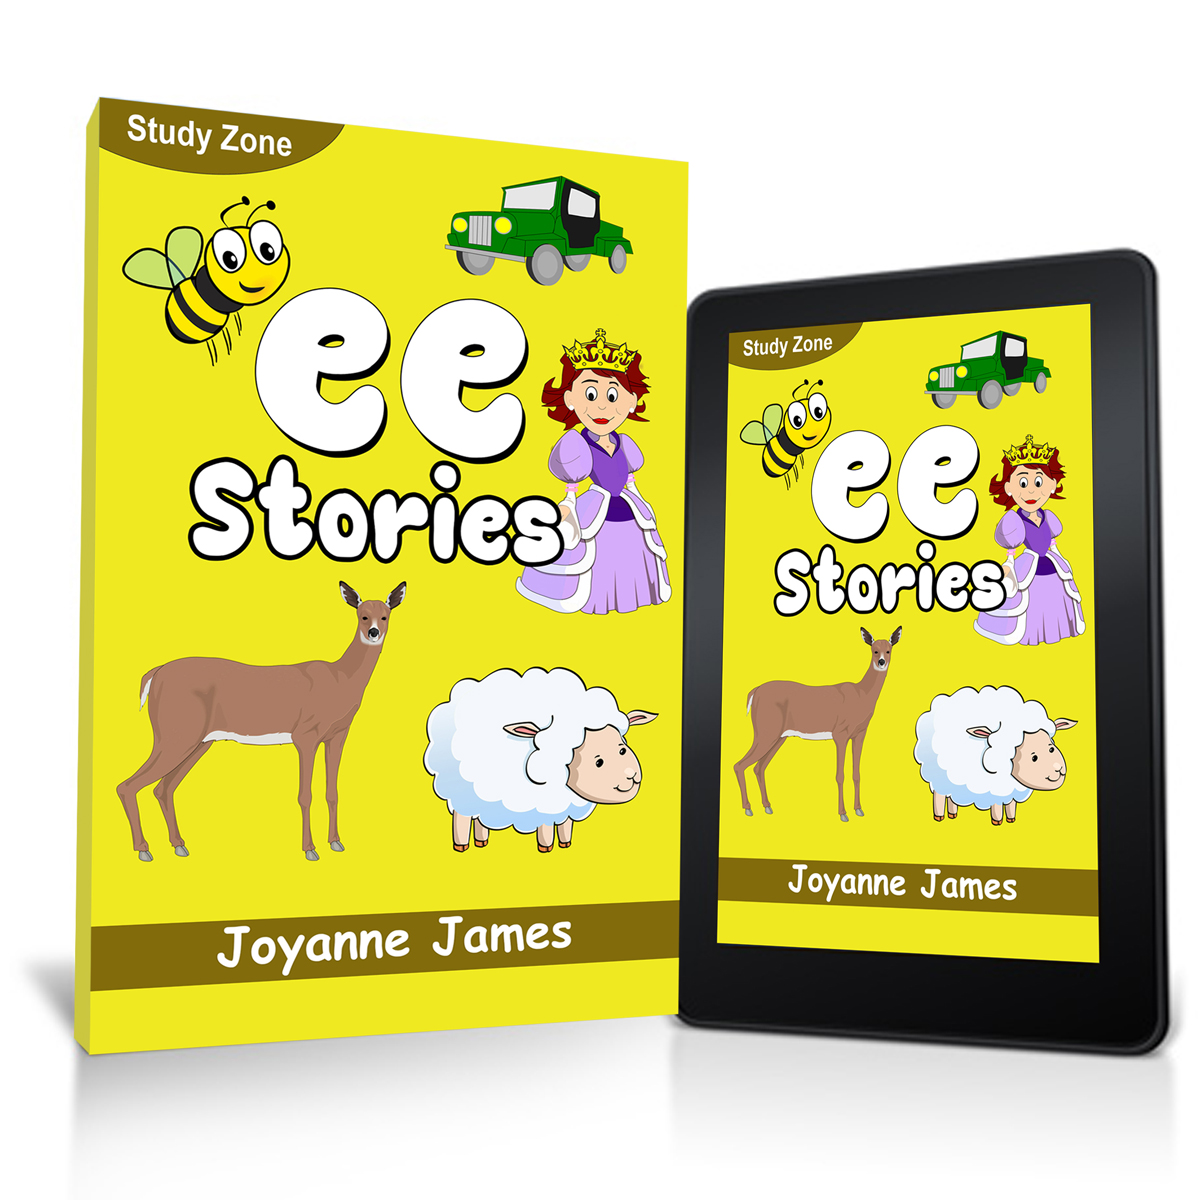 EE Stories. Improve Spelling and Reading Skills Publications.